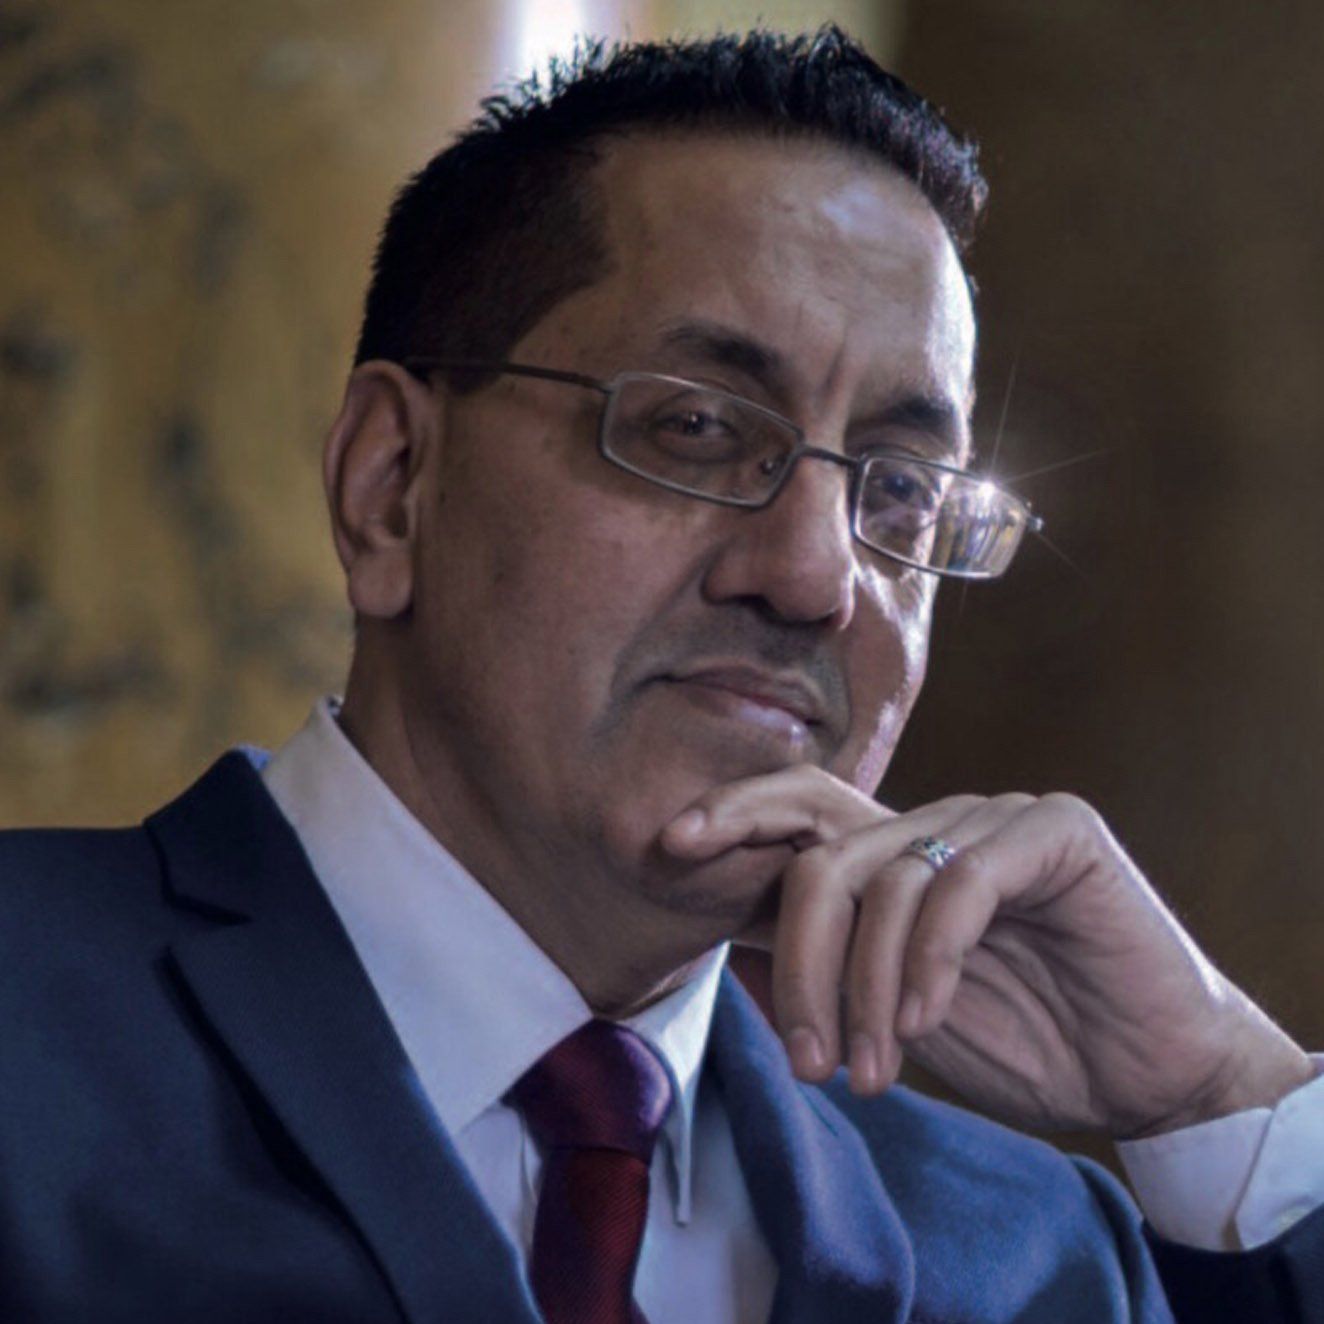 Nazir Afzal OBE will be on the Live Stage at CrimeCon UK